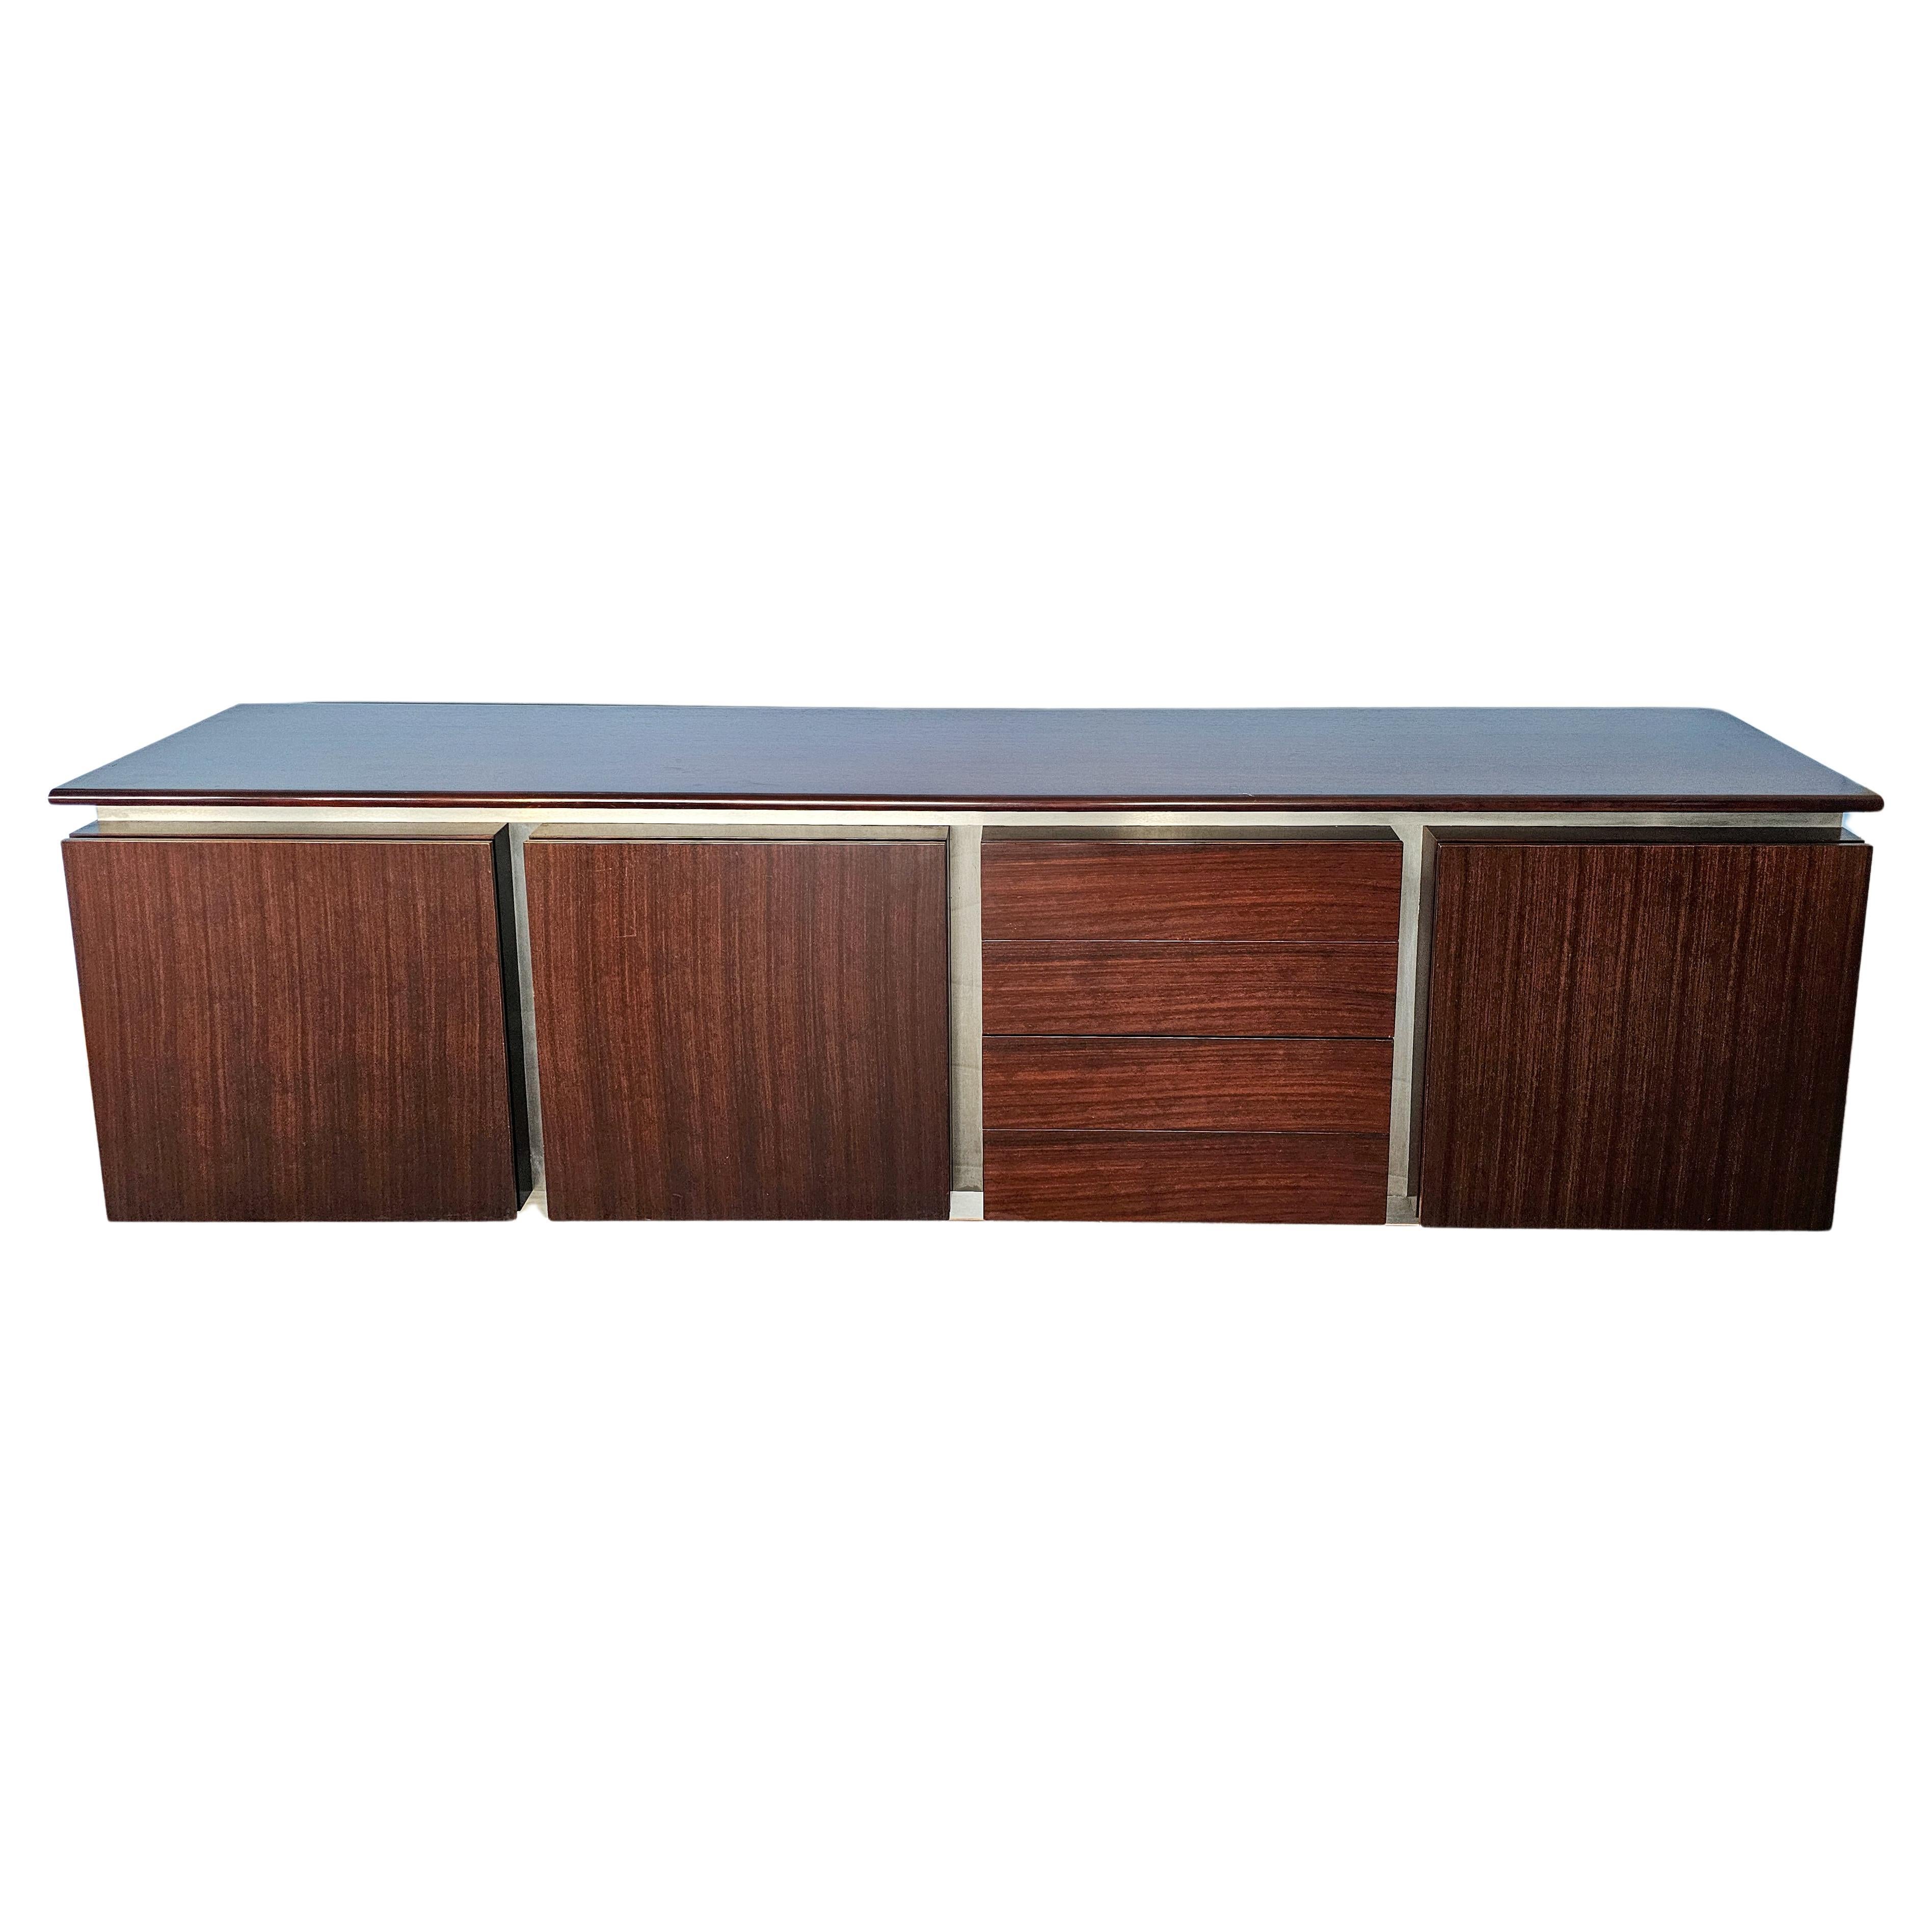 Italian Sideboard Parioli designed by Giotto Stoppino and Marco Acerbis in 1980s